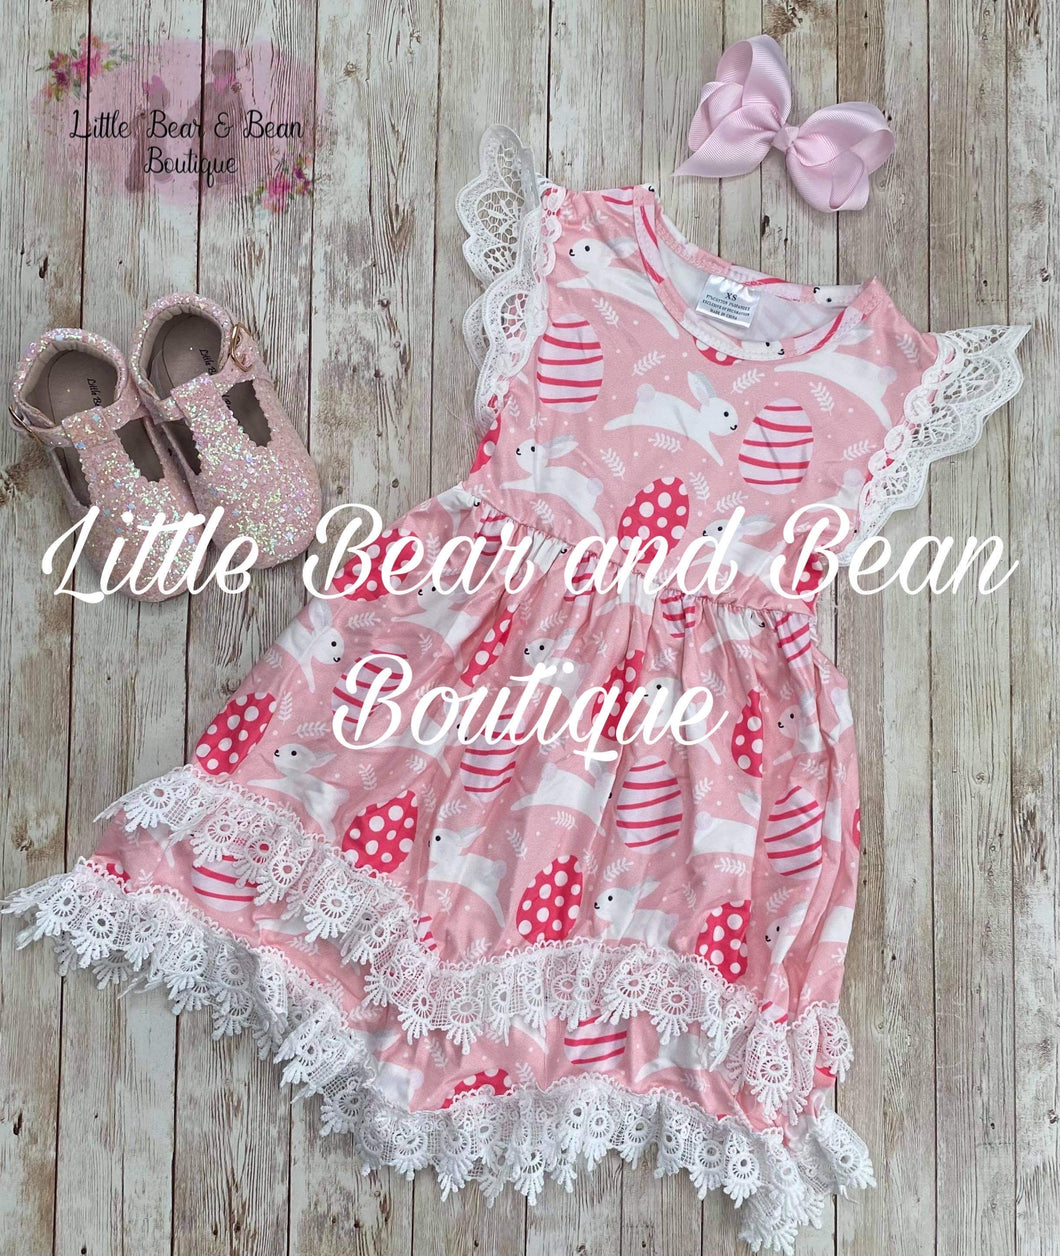 Bunnies and Eggs Dress with Lace Trim